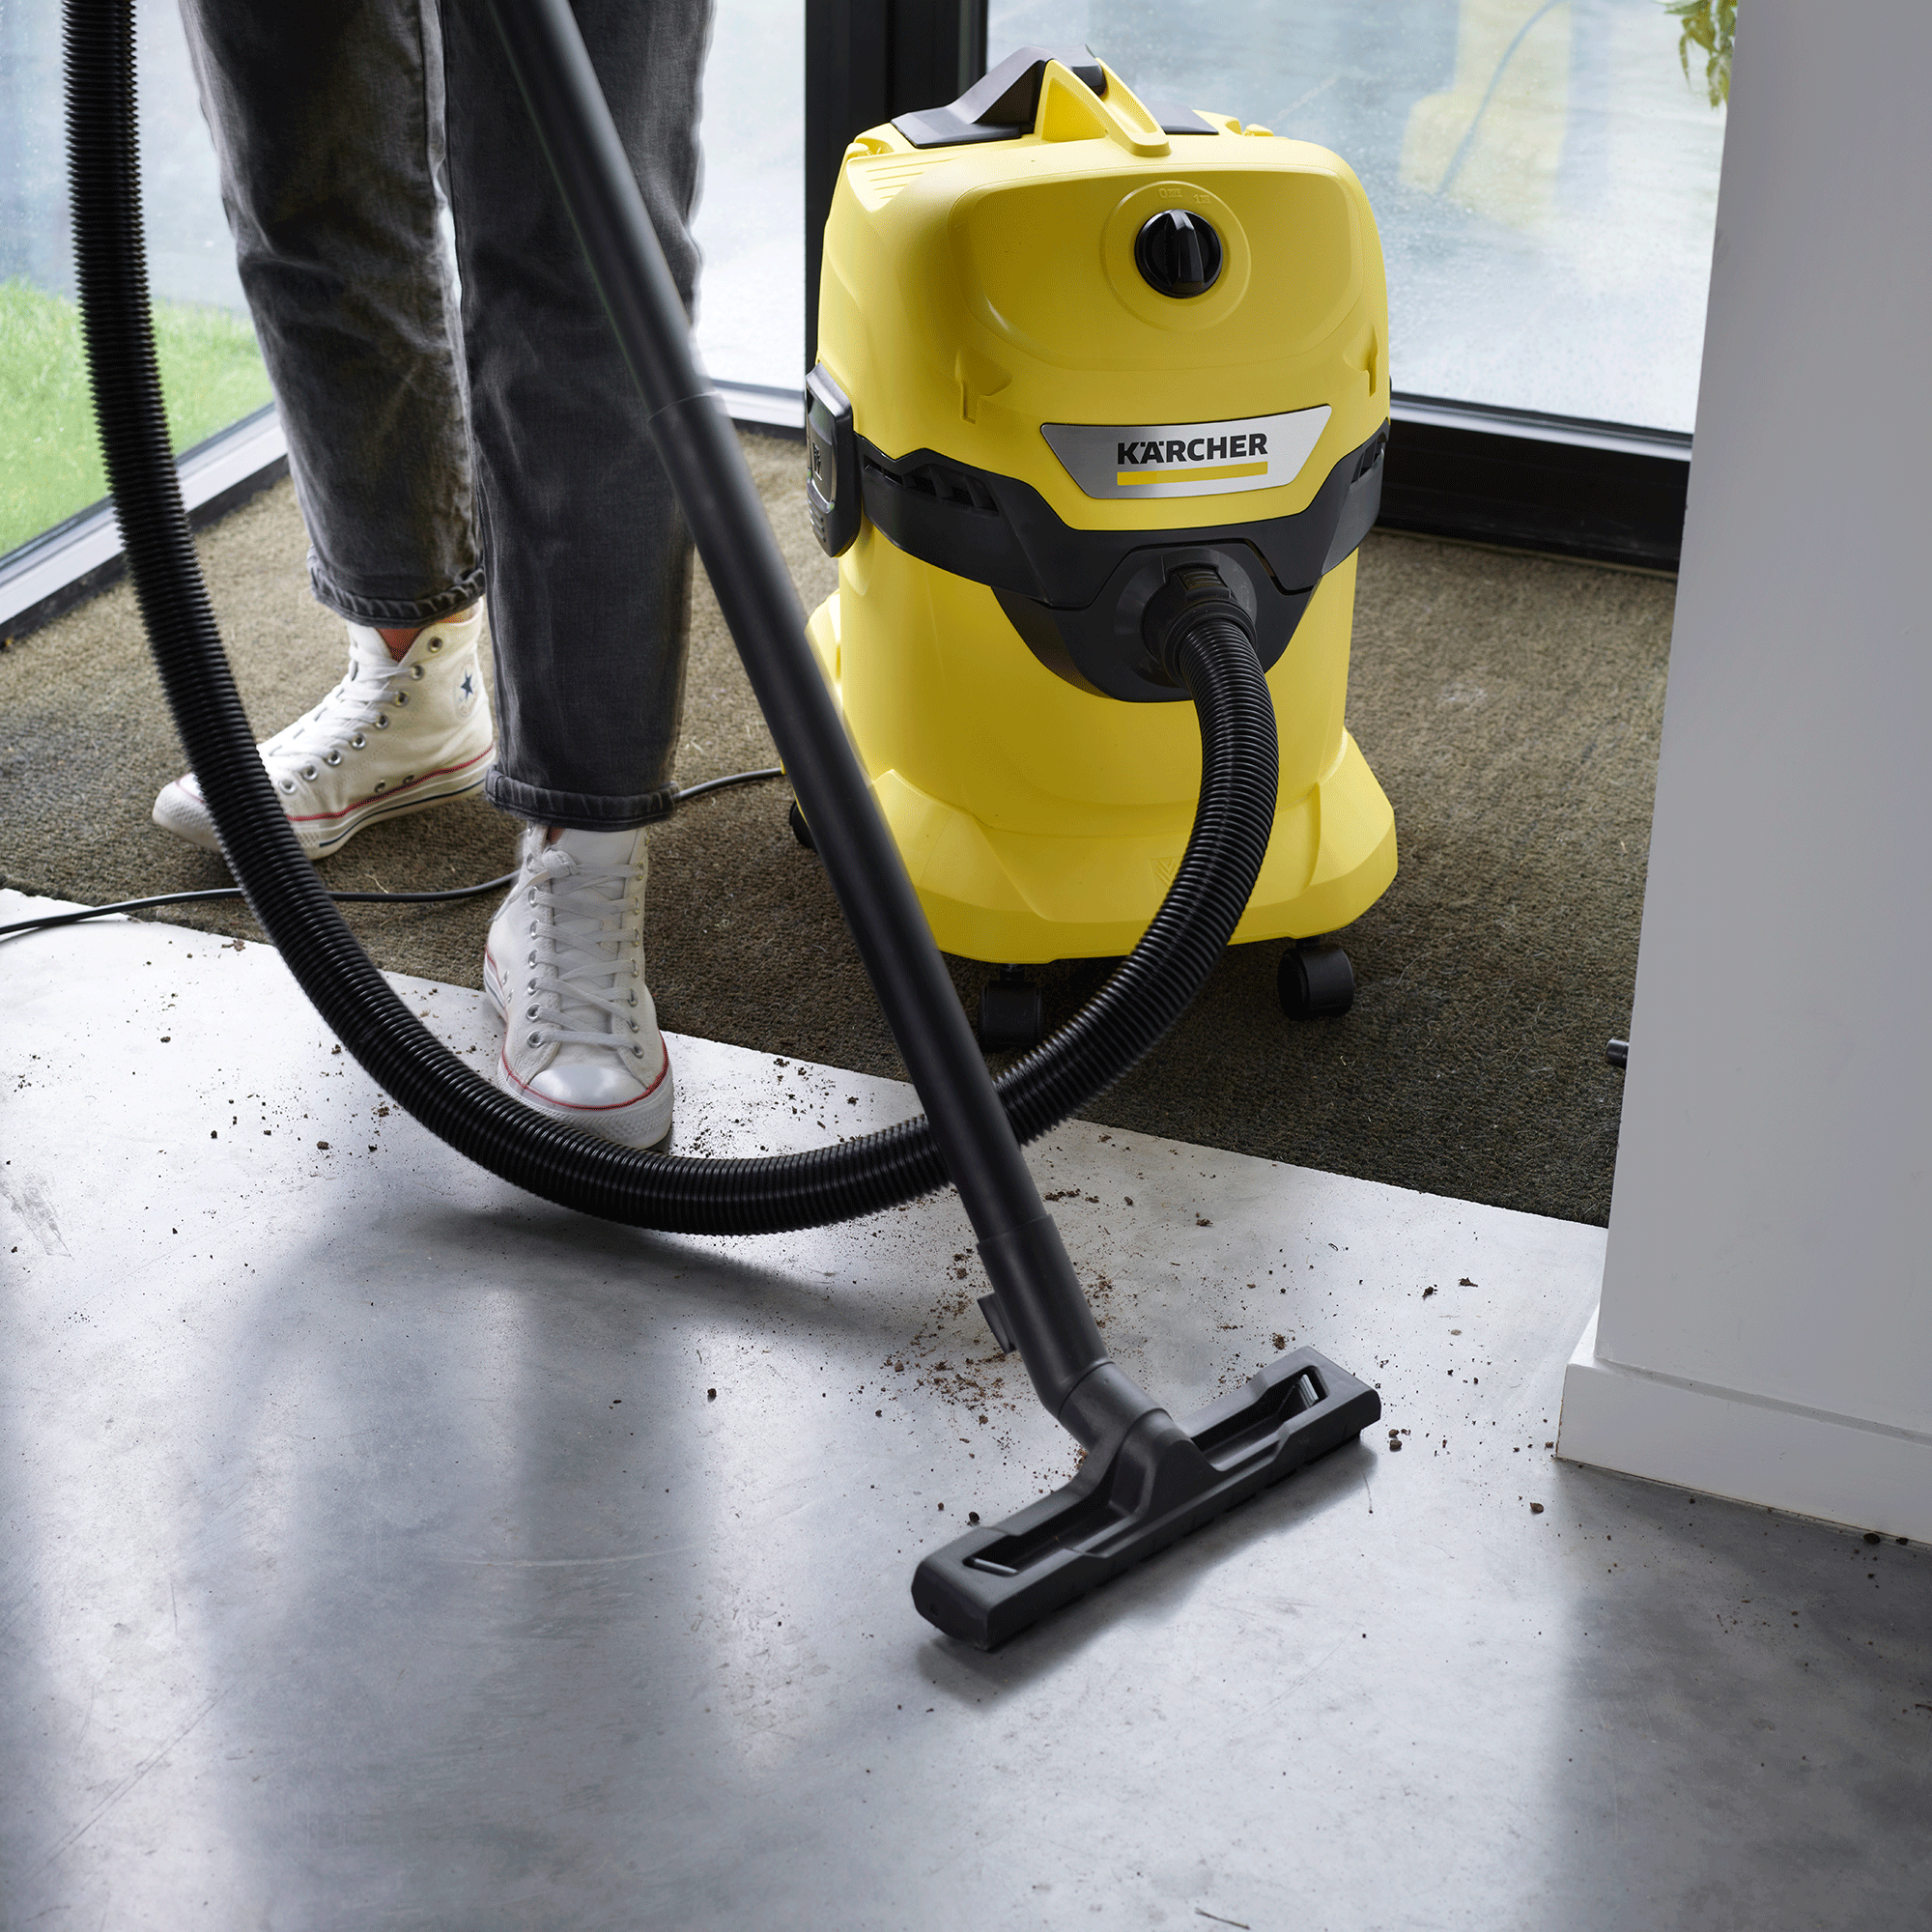 Kärcher wet and dry vacuum cleaner